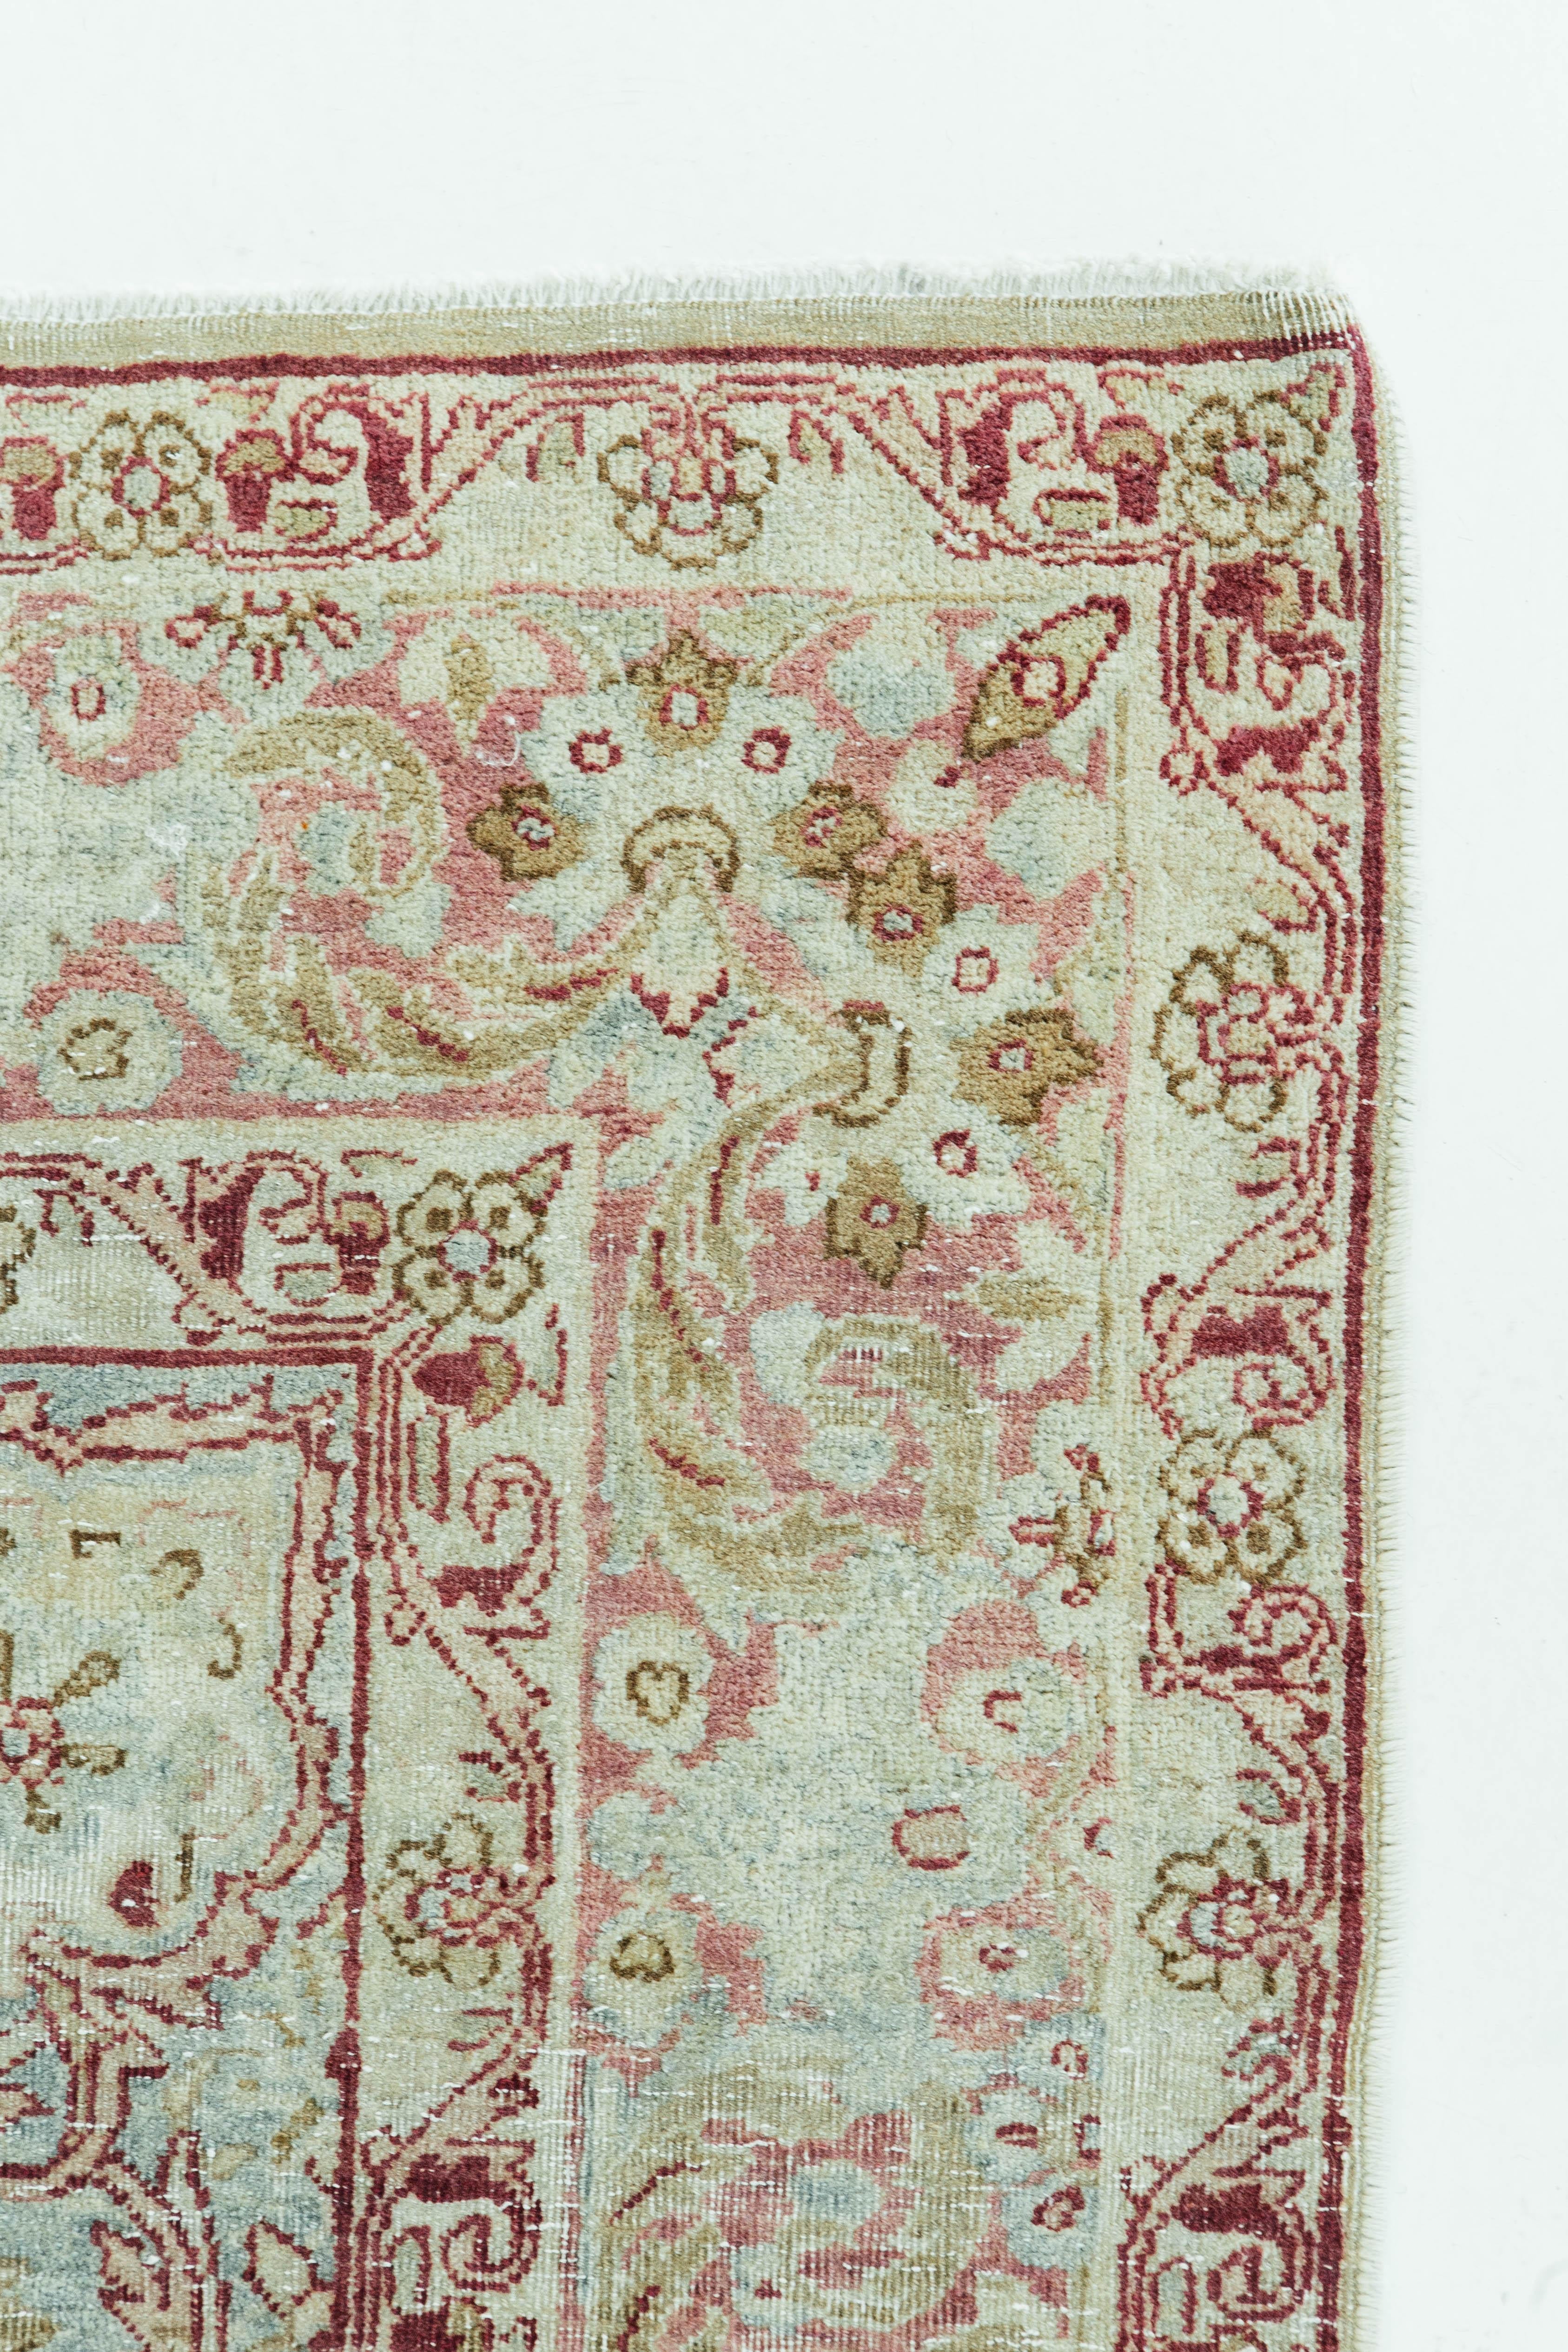 This antique Persian Kerman has a combination of soft hues yet vibrant colors that bring out the rug's Classic design. Its interesting vintage texture and color ways keep the eye engaged and brings a luxurious essence. The city of Kerman is situated